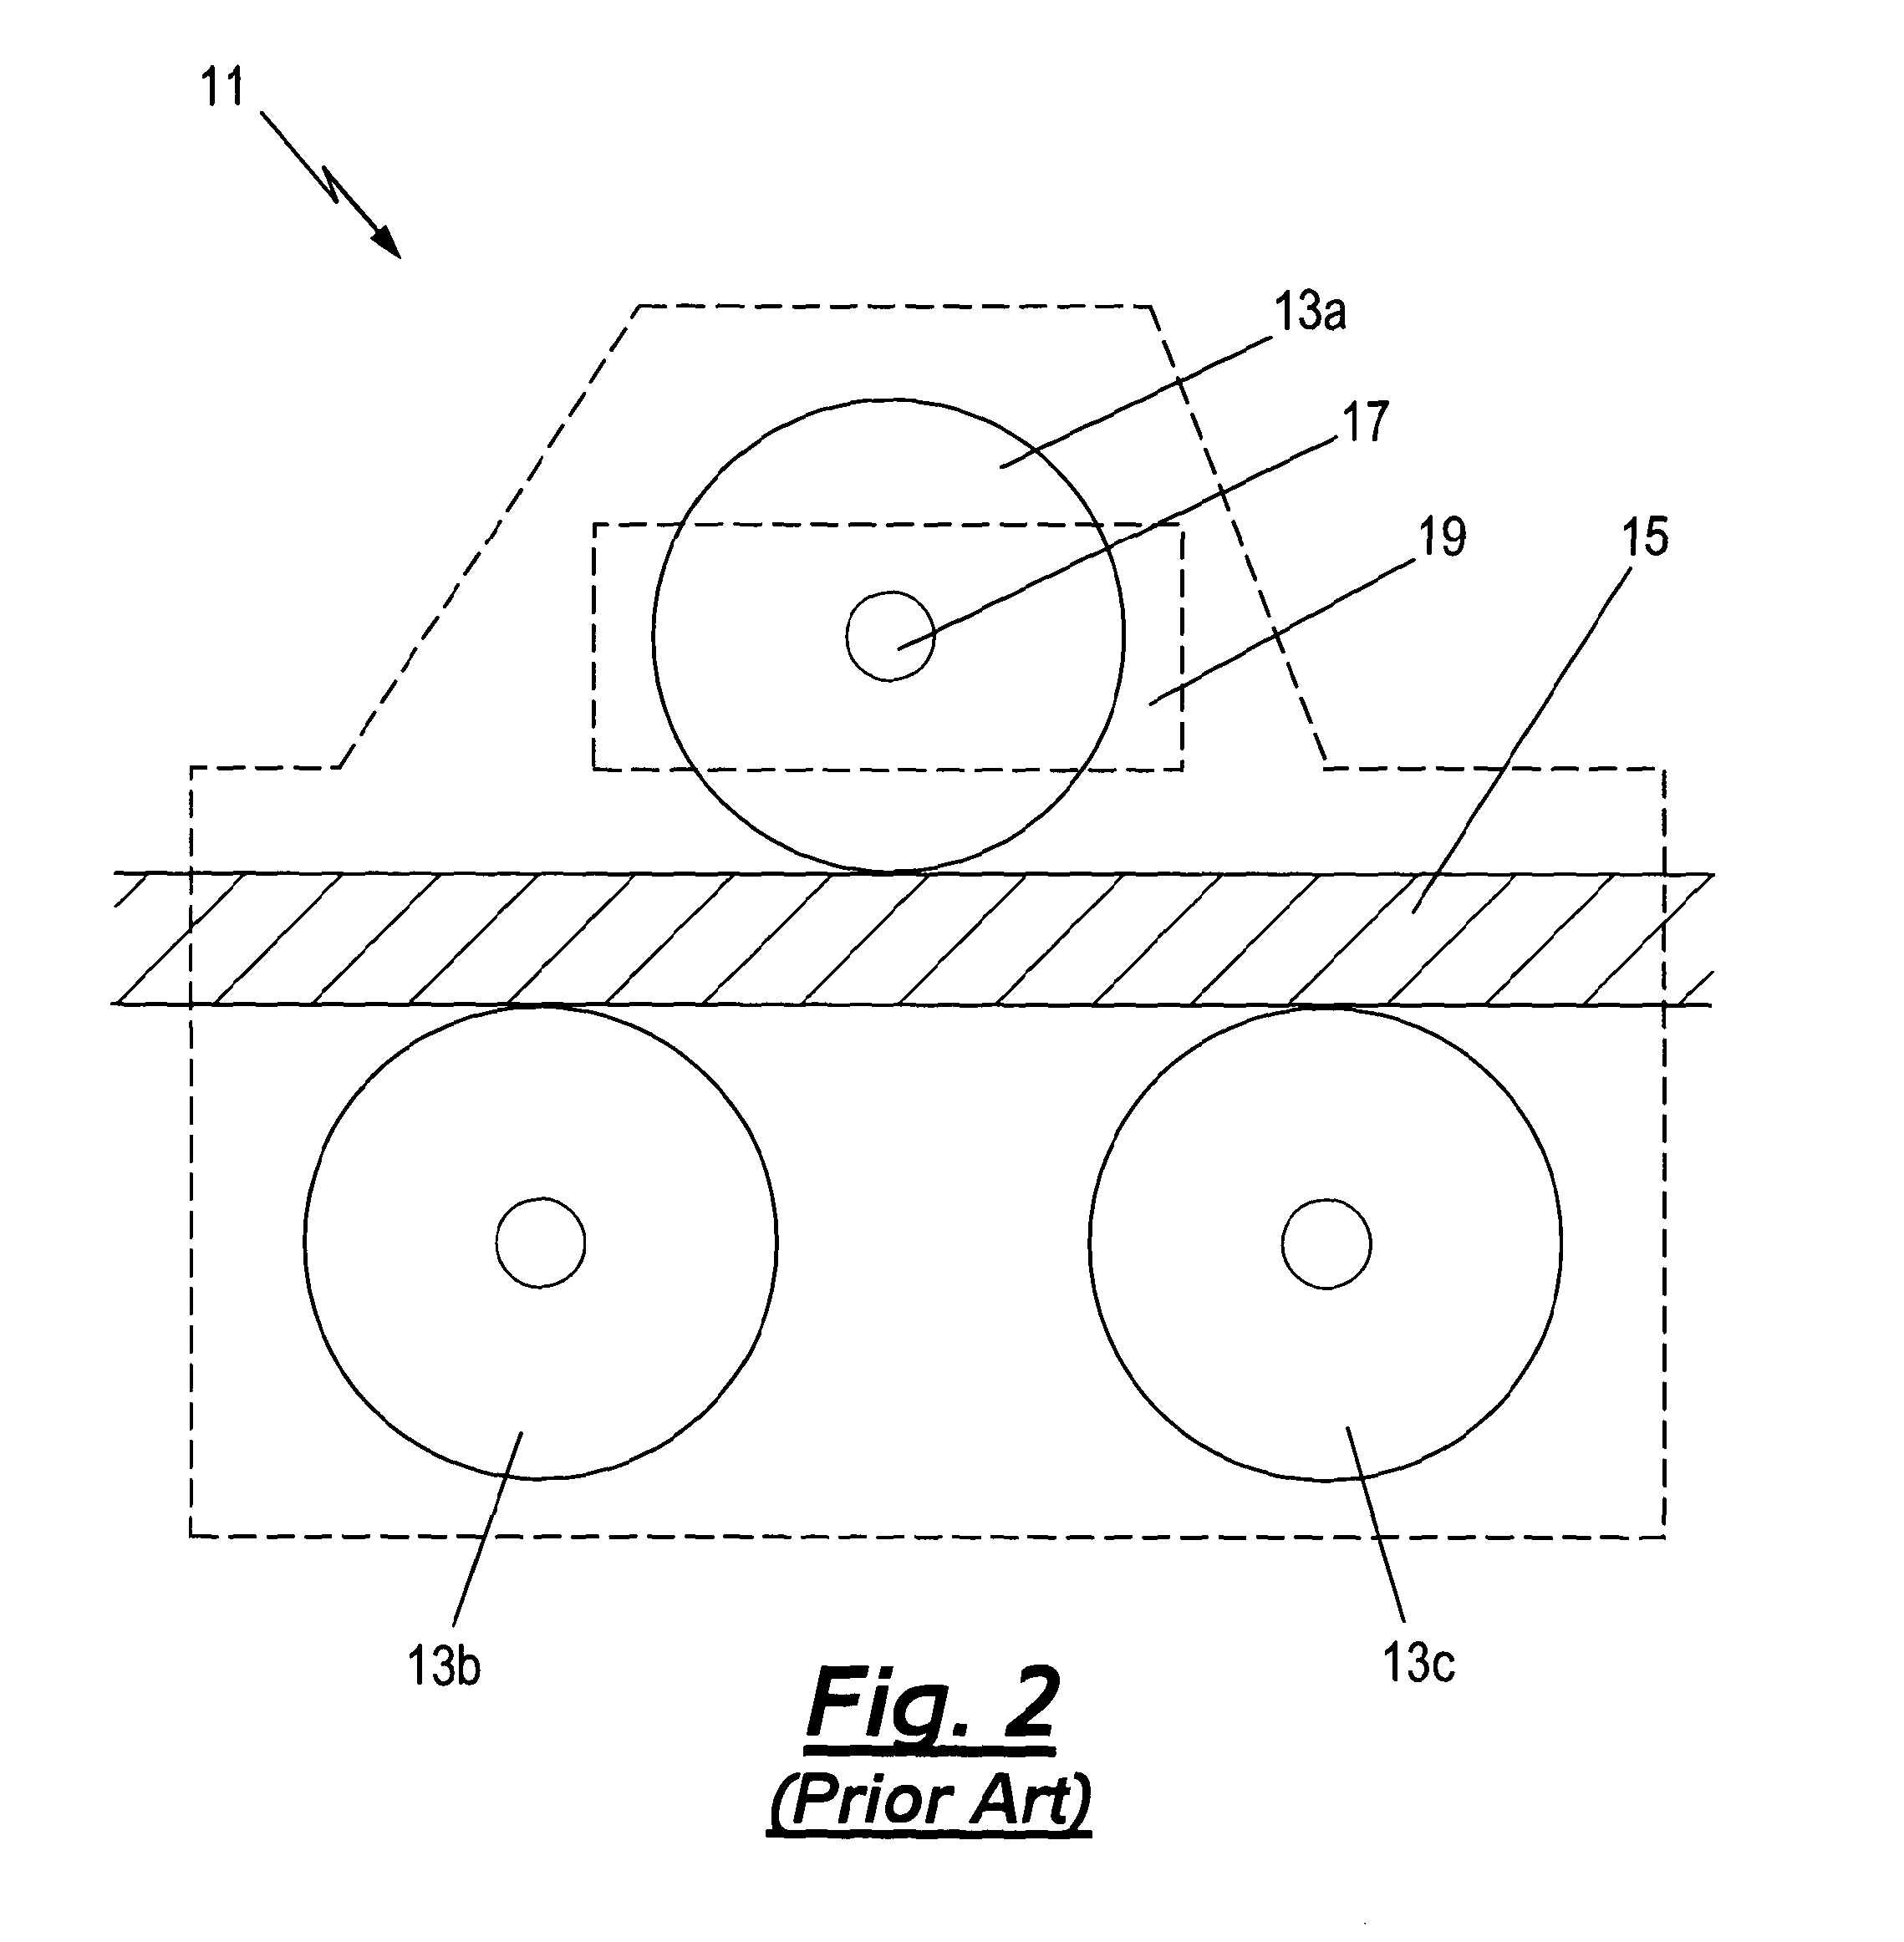 Method of determining the tension in a mooring line